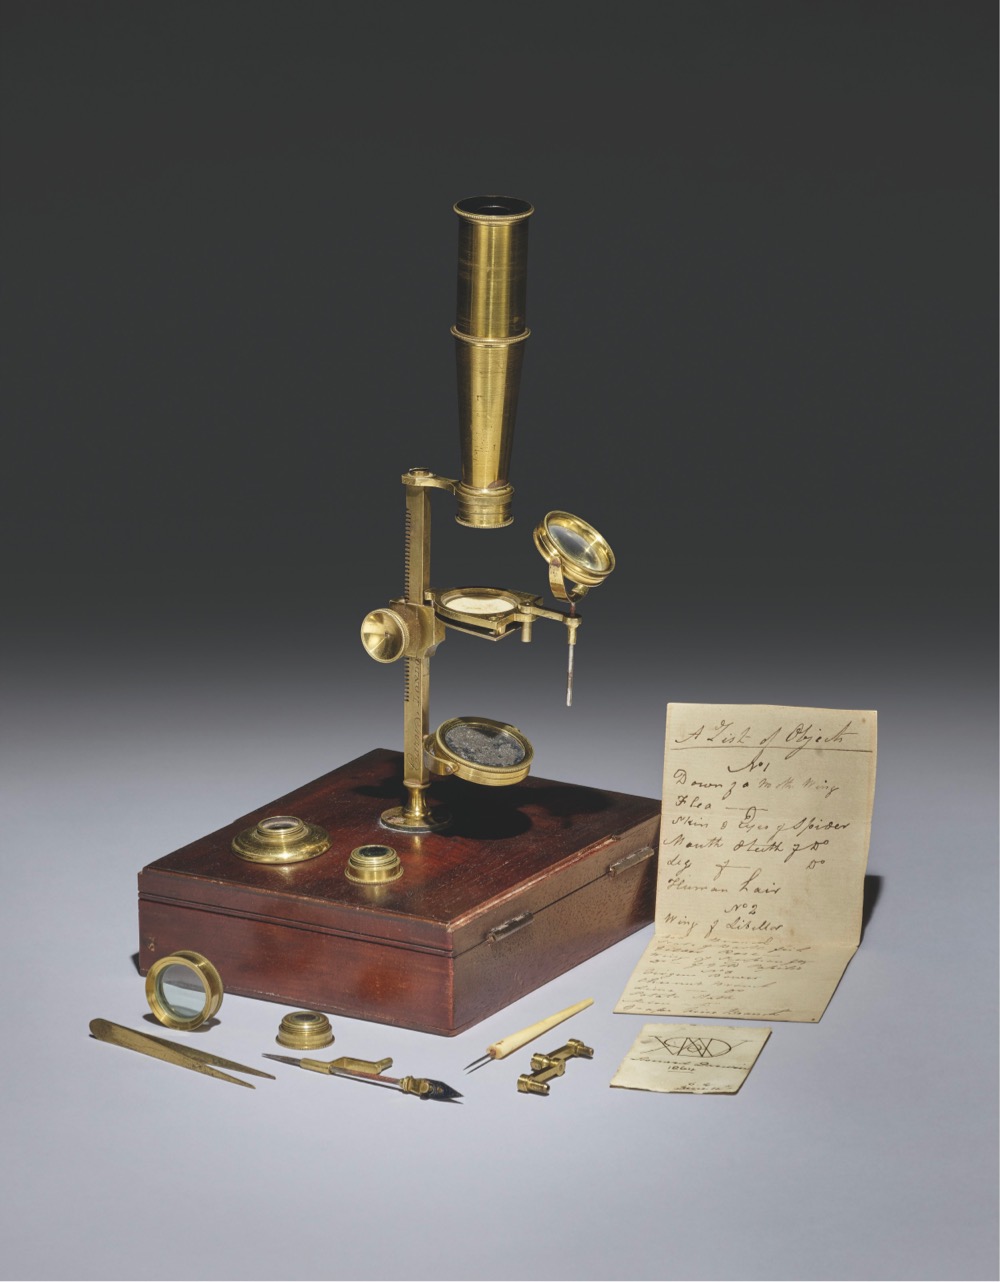 a brass microscope that was owned by Charles Darwin